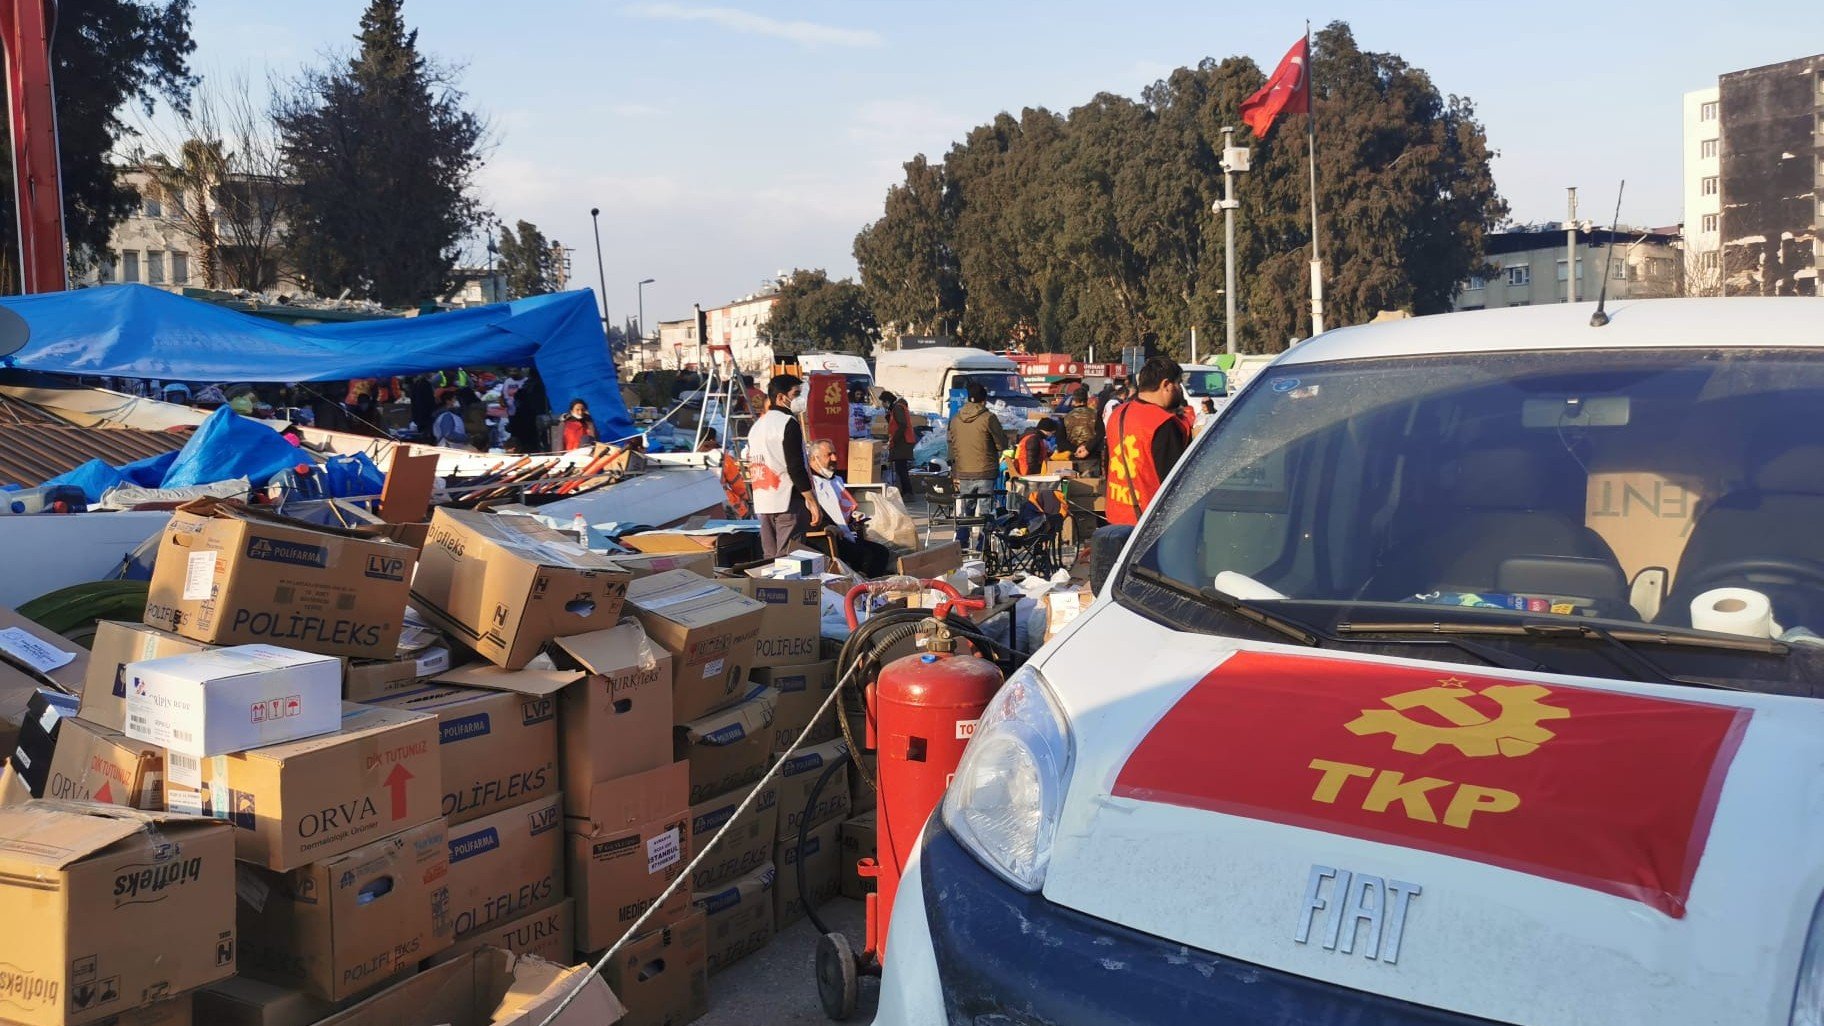 Turkey's Communist Party (TKP) have carried out search and rescue efforts and provided emergency first aid in quake-hit areas (MEE/Levent Kemal)